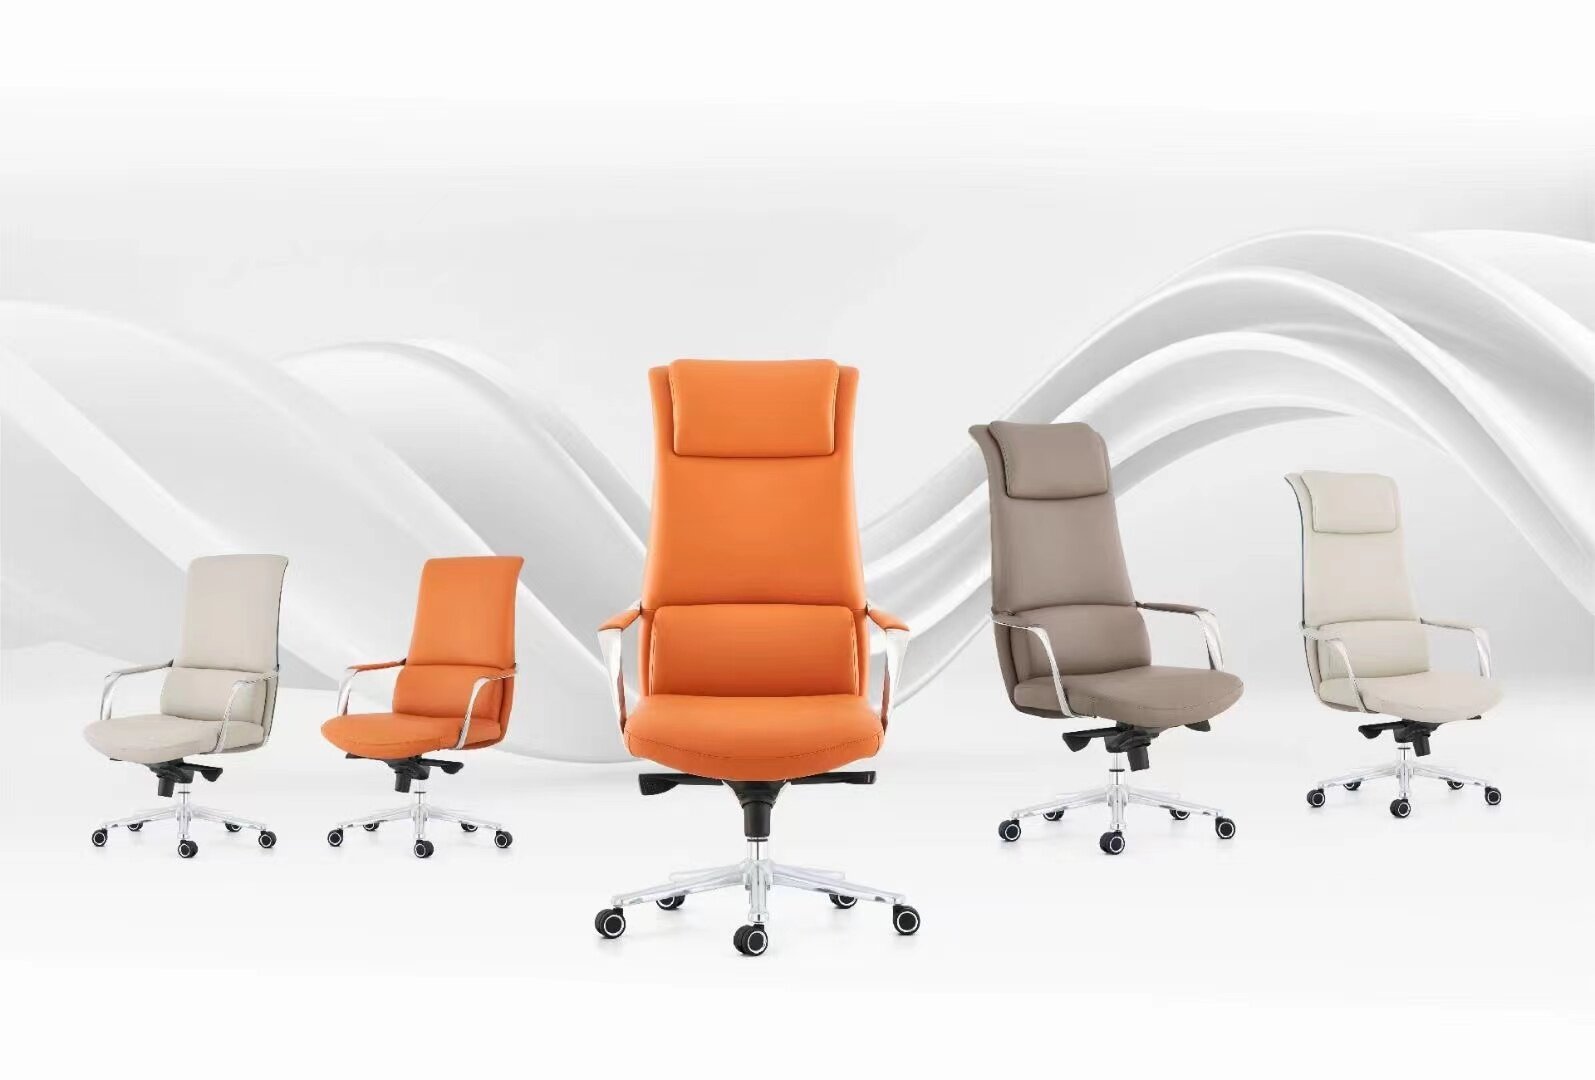 What is a Reclining Executive Office Chairs, and what are its features?